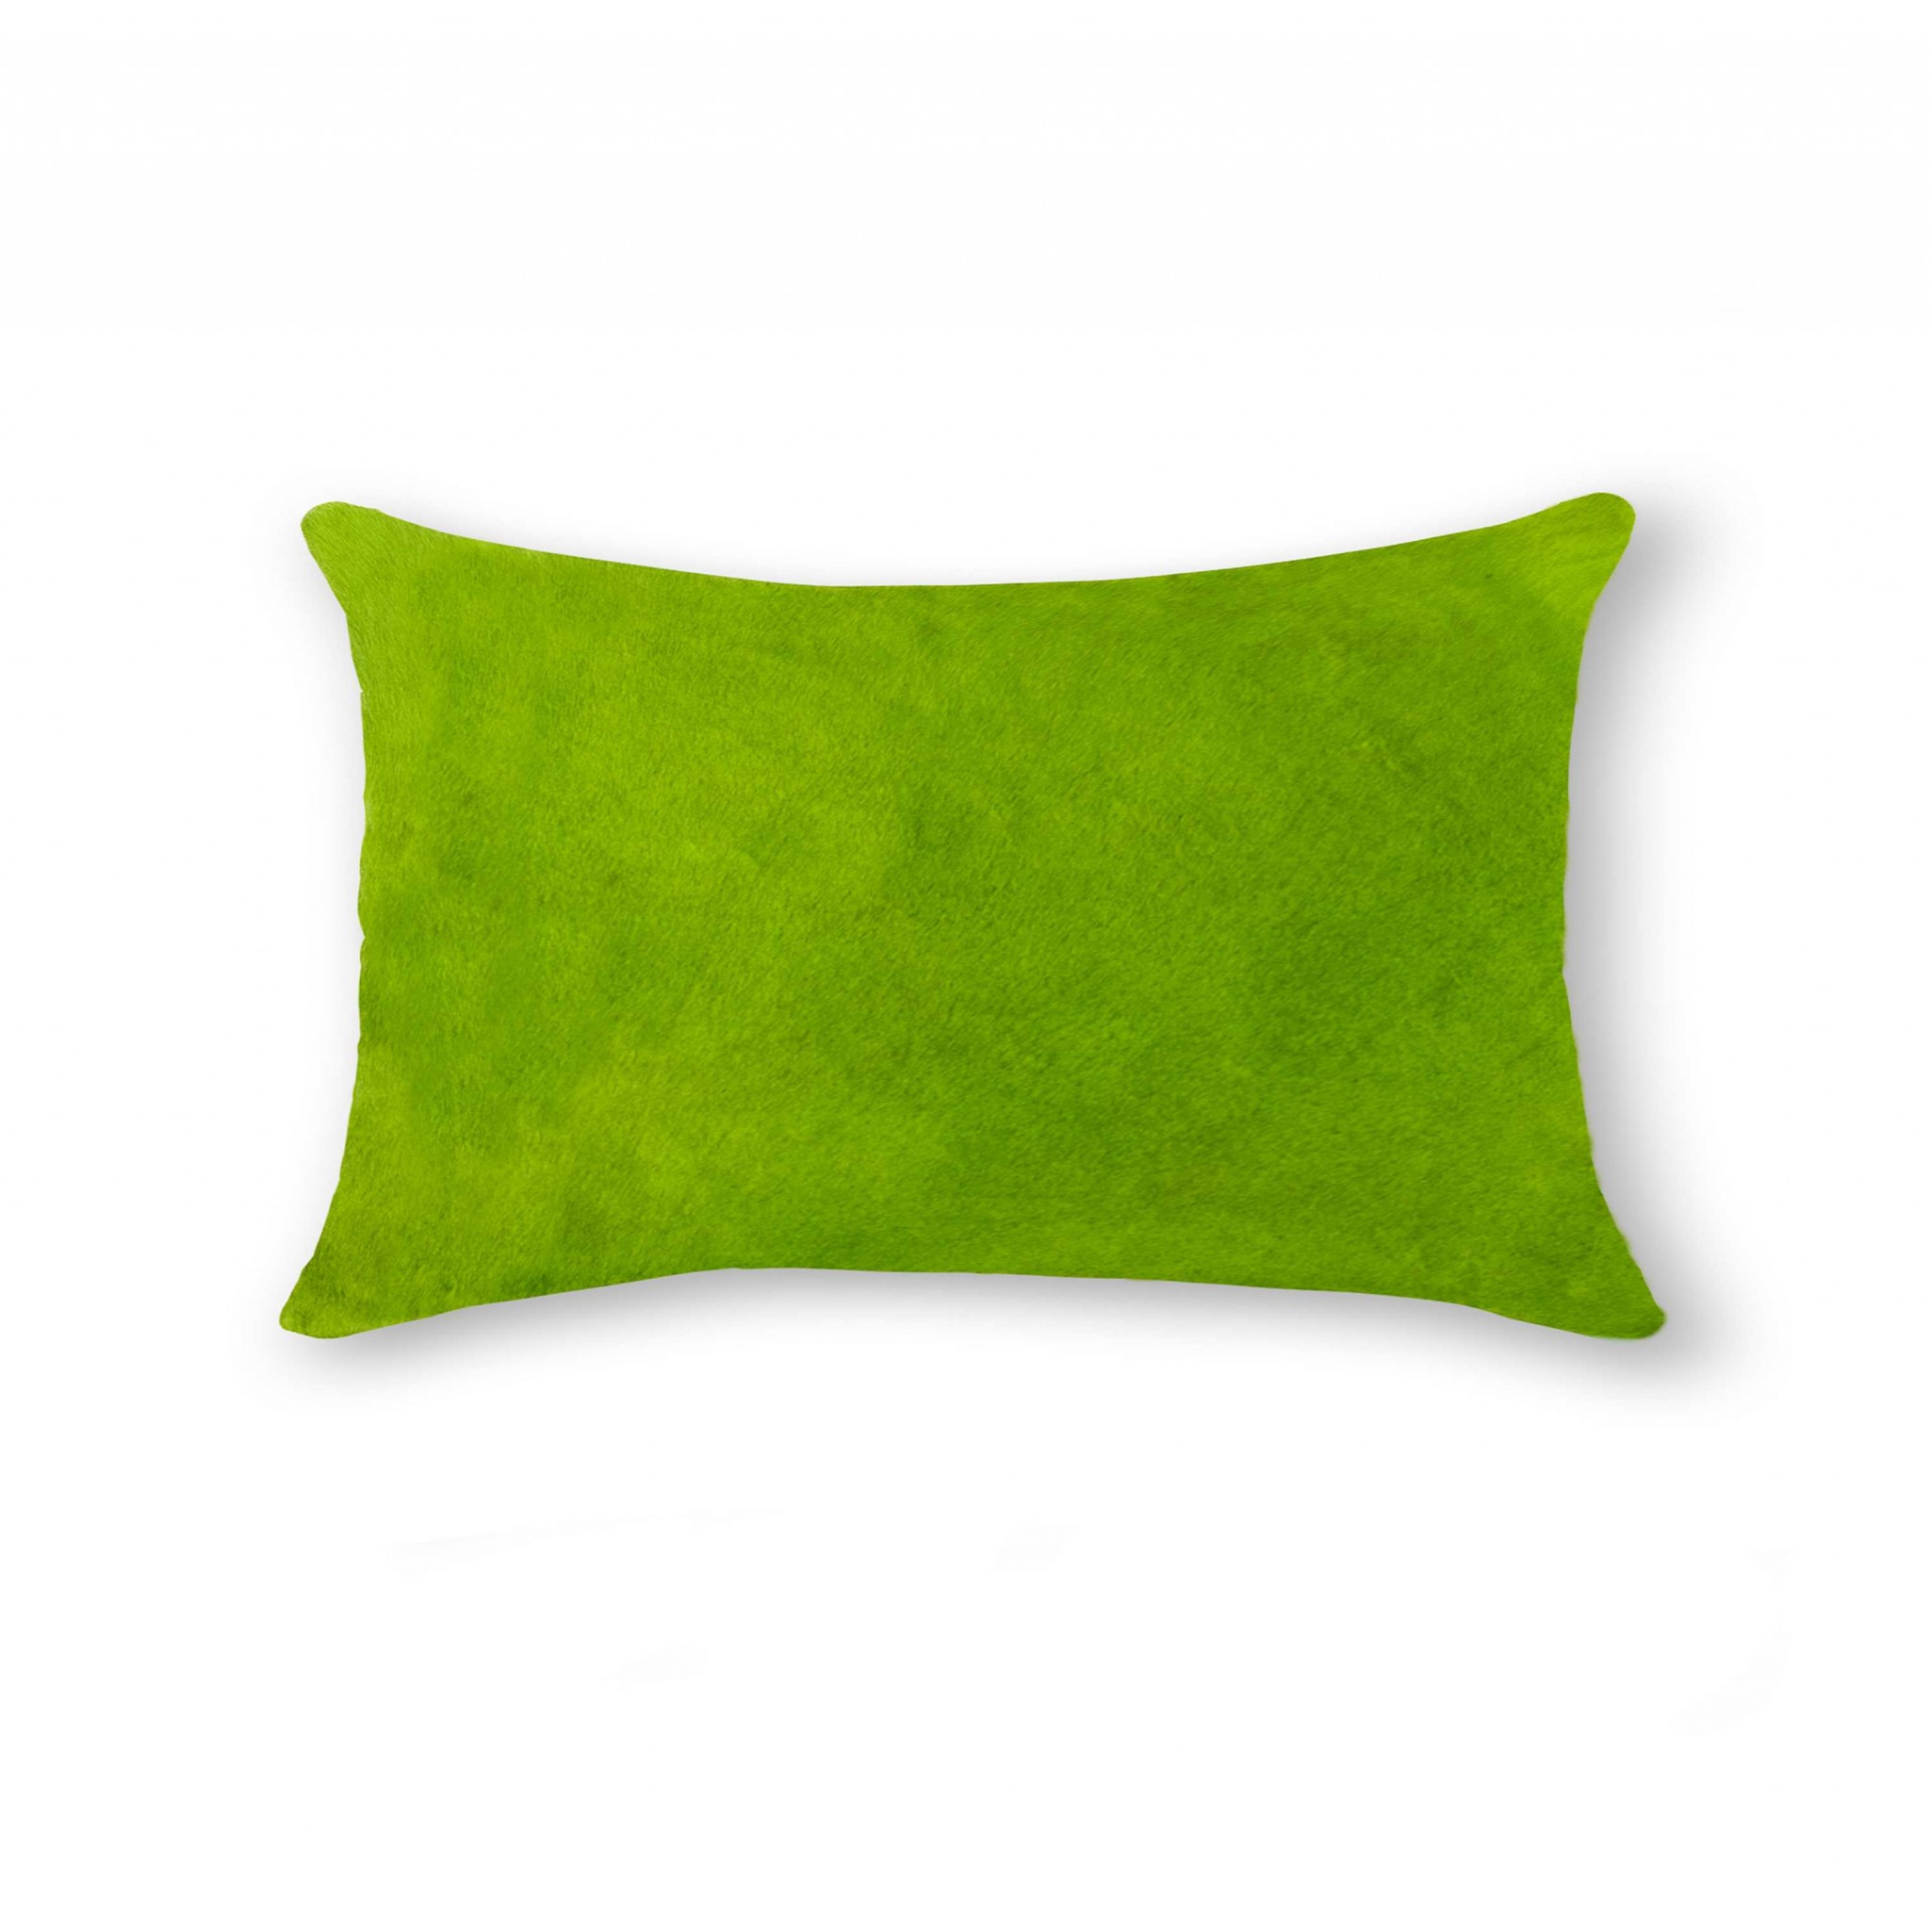 12" x 20" x 5" Lime Cowhide - Pillow